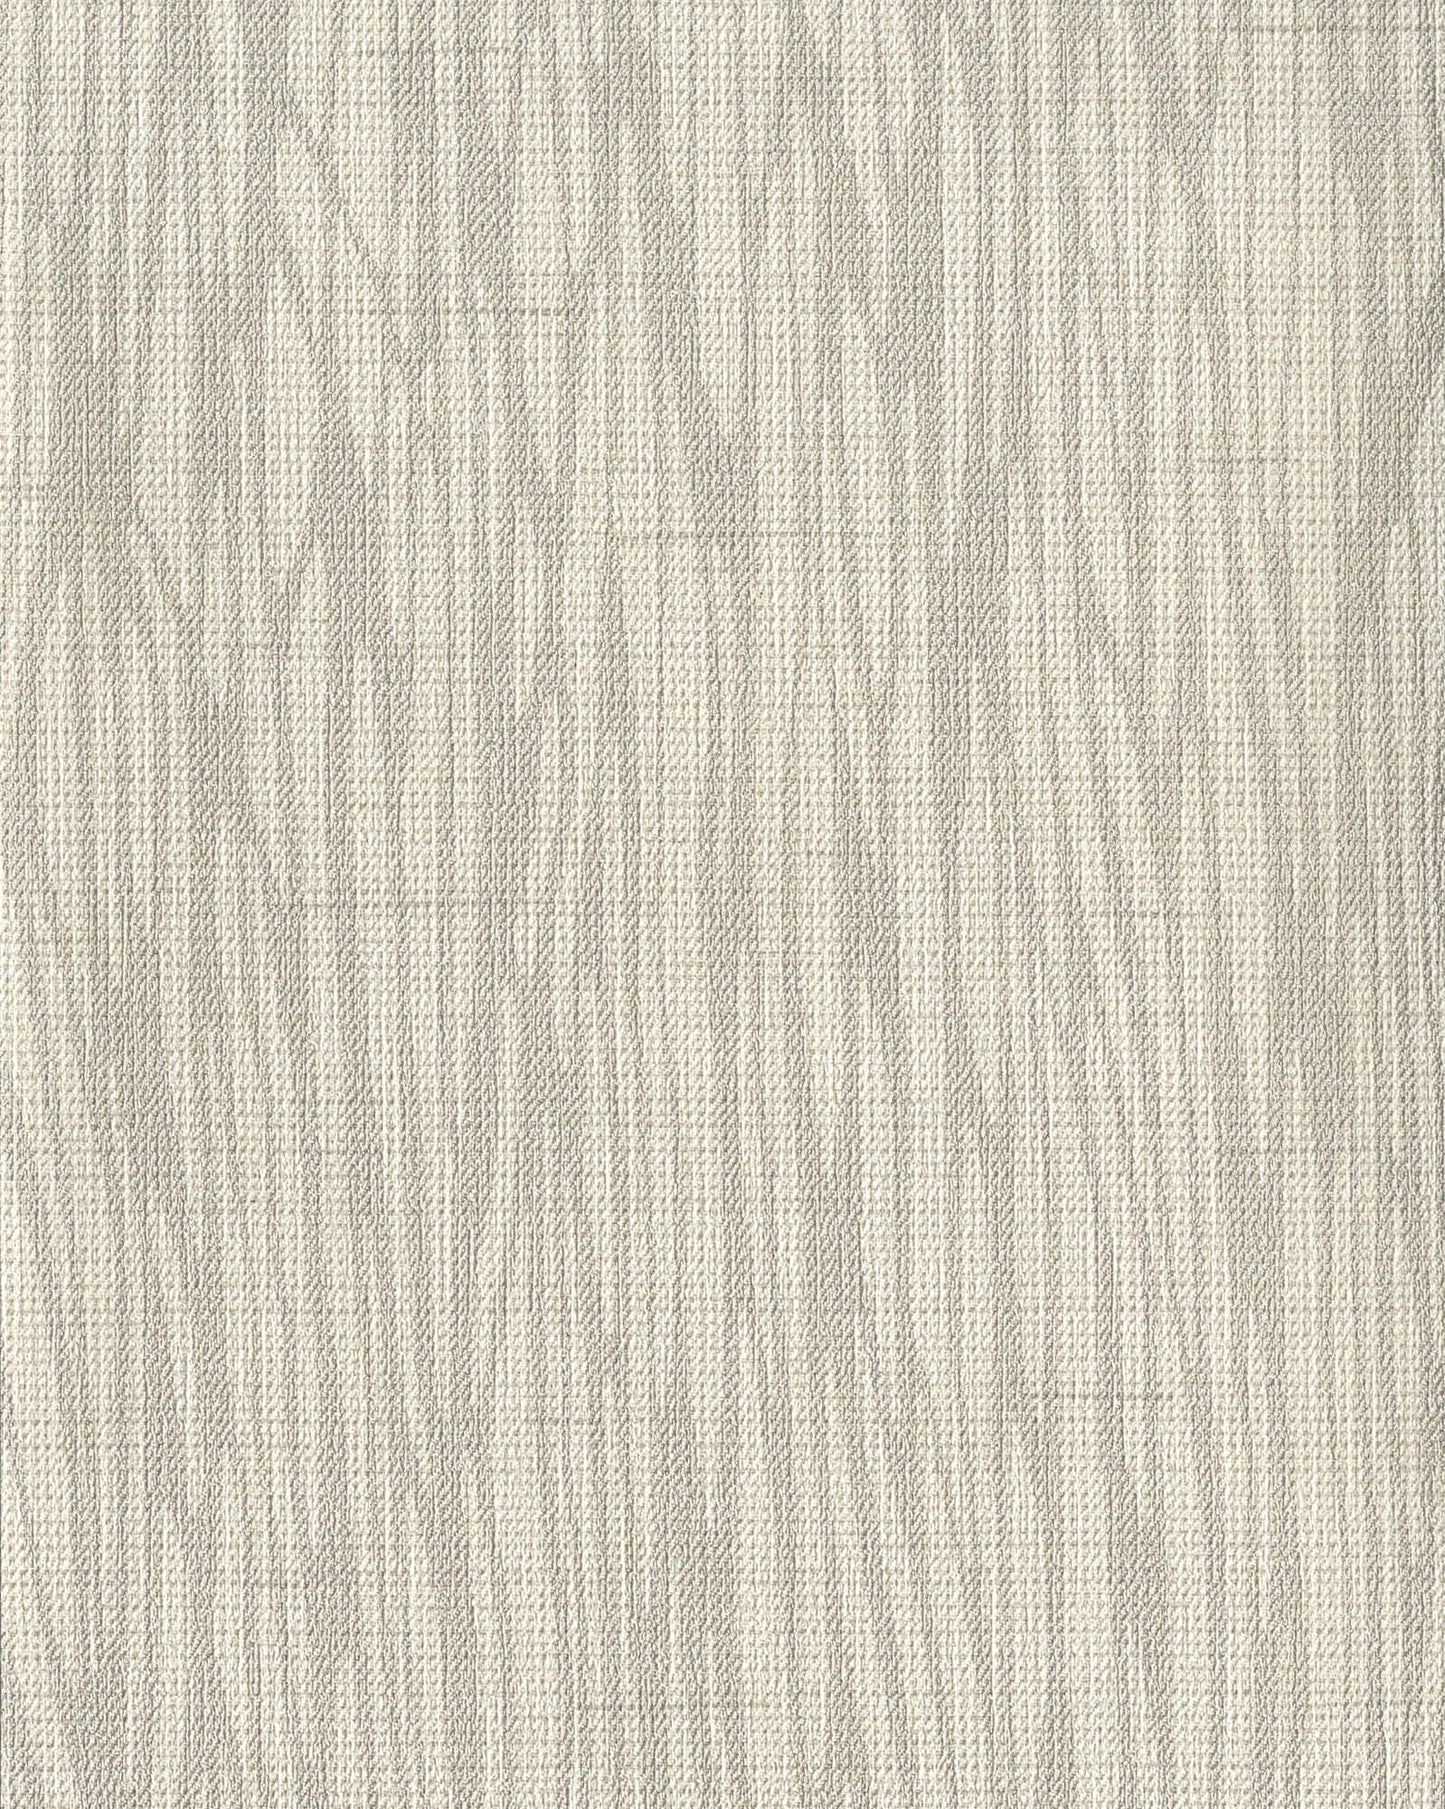 FF5004 54" inch Banbury Commercial Textured Wallpaper